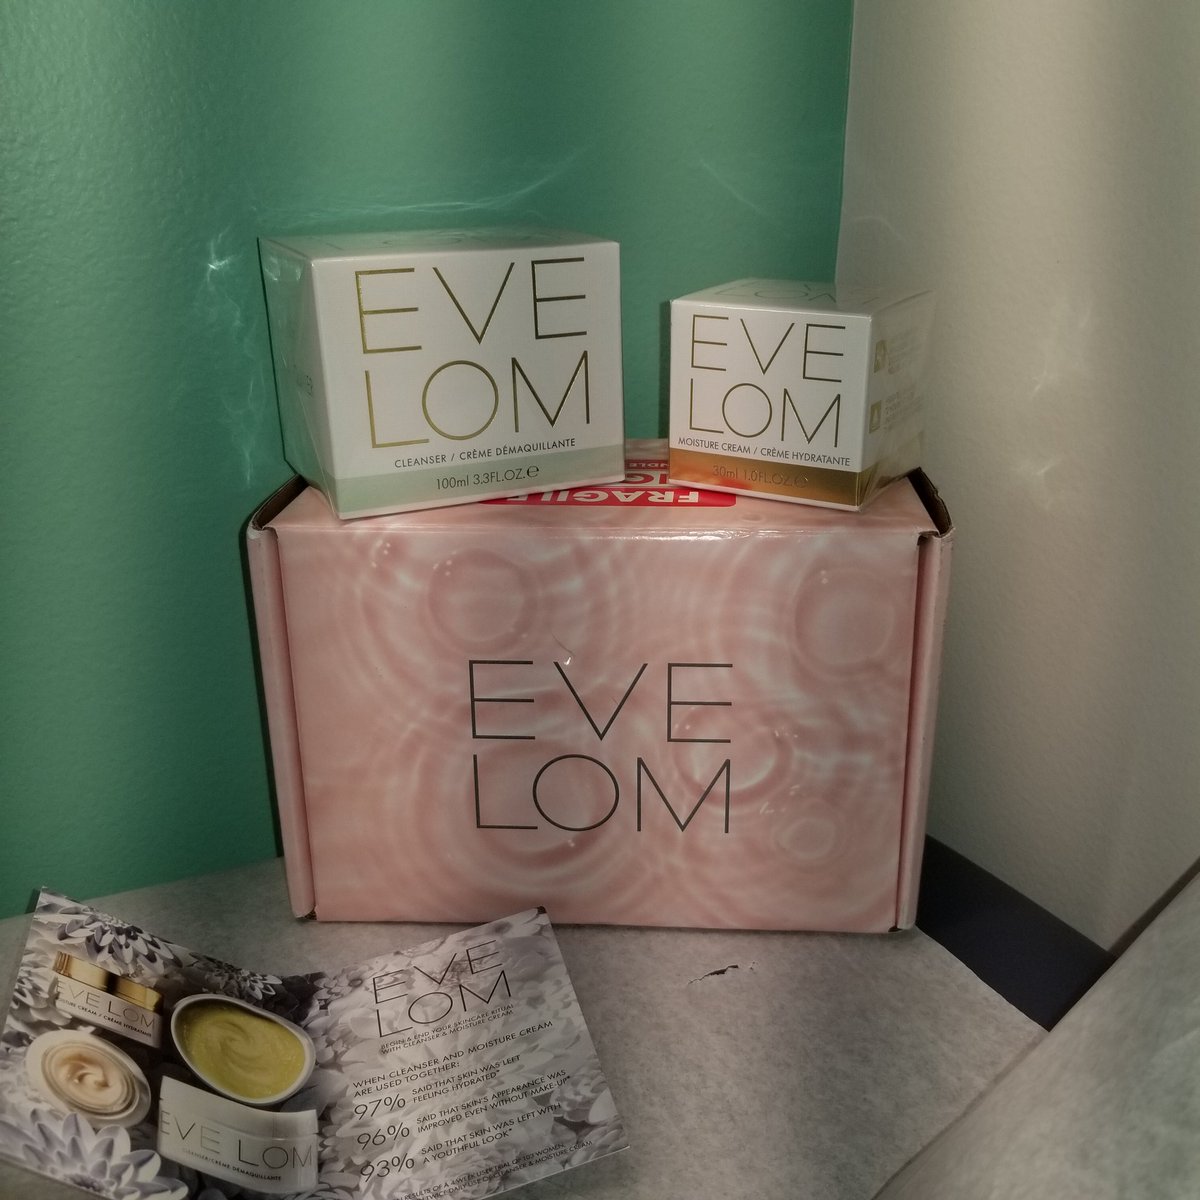 I Reived these complements of @Influenster for review/ testing purposes. #cleansewithevelom #complimentary @Influenster @evelom  #skincare #skincareproducts #skincareoftheday